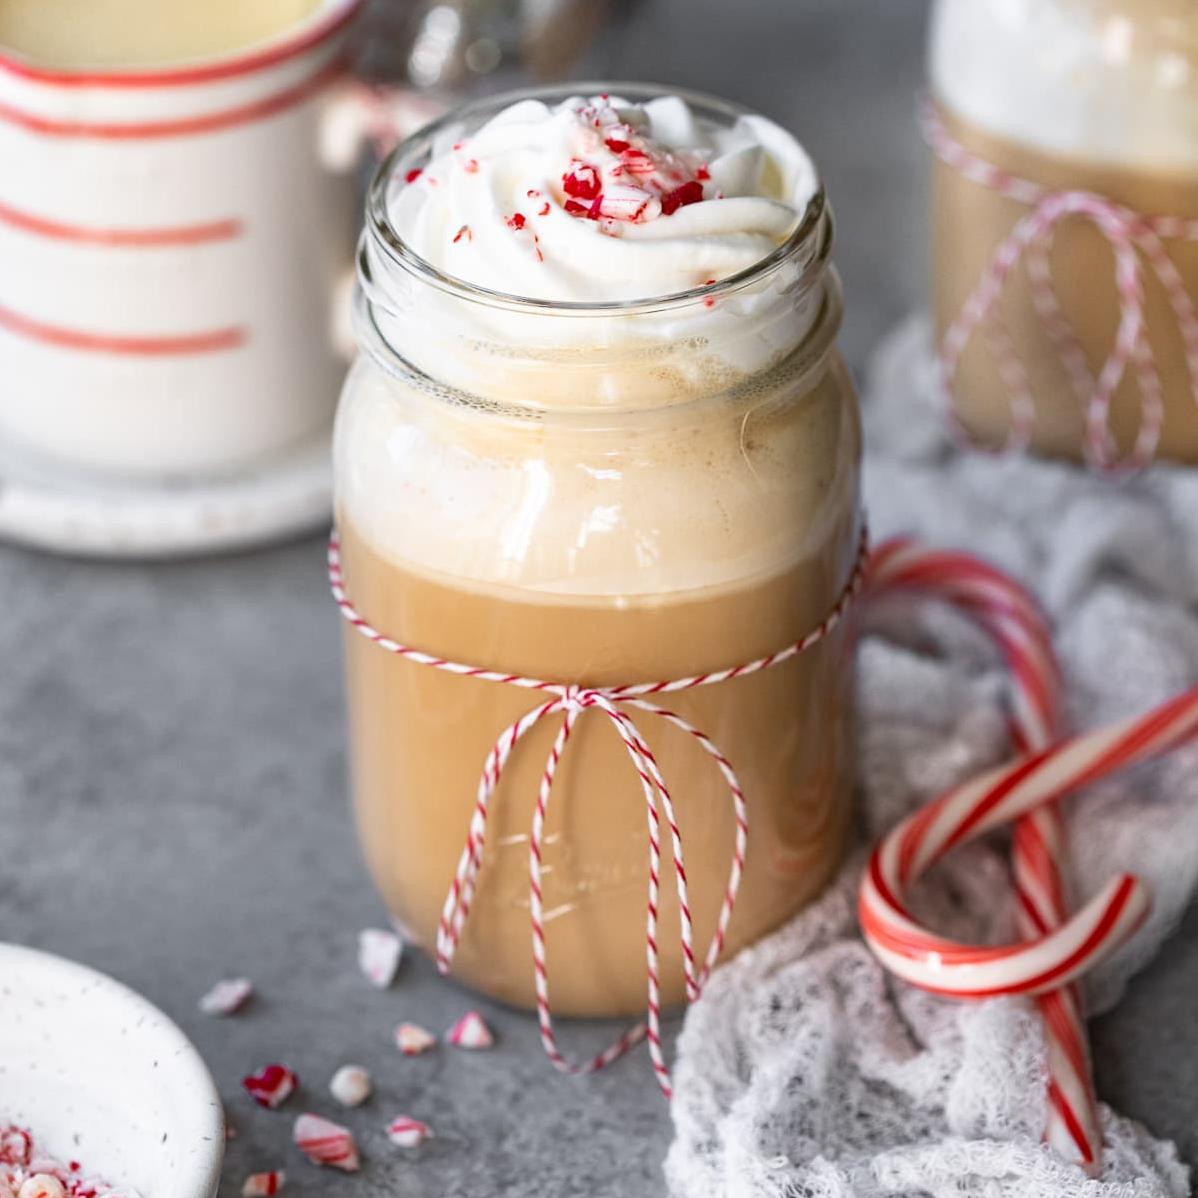  Topped with whipped cream and crushed candy canes, this coffee is a treat for the eyes and taste buds